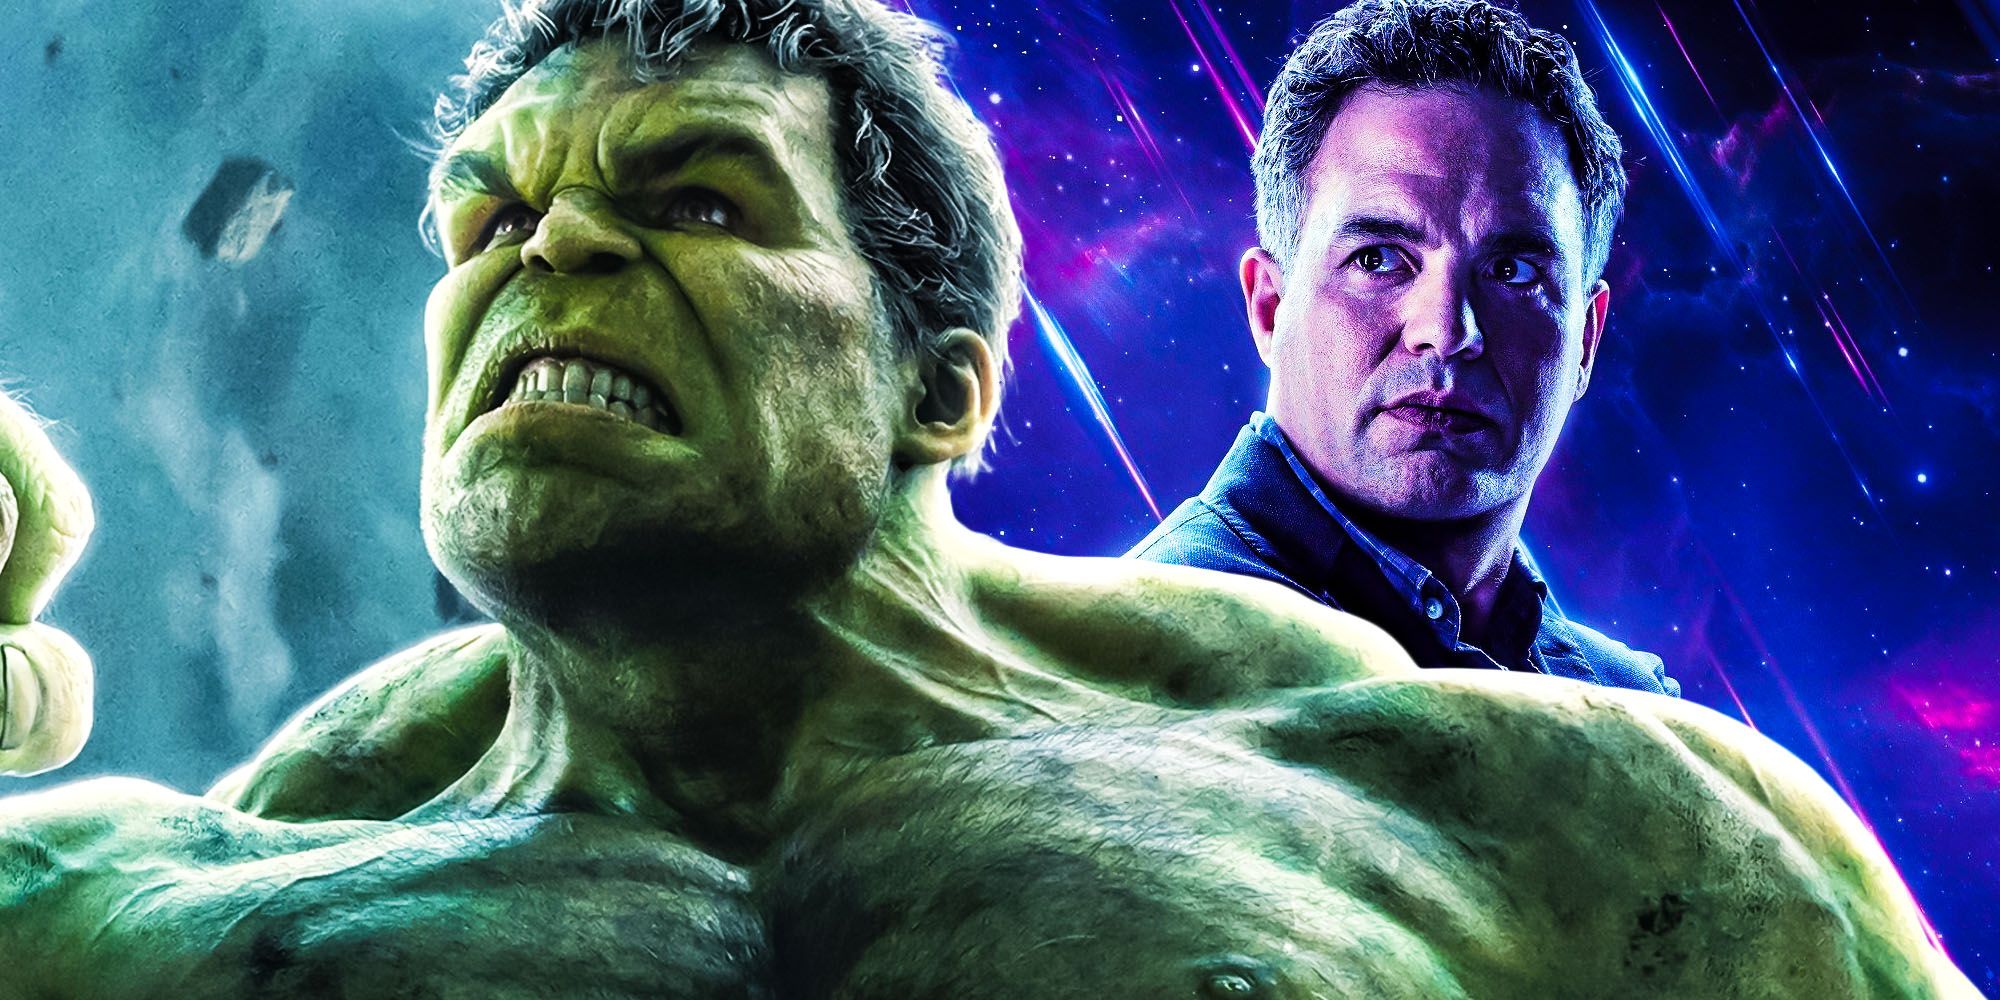 A blended image features Hulk in front of Bruce Banner